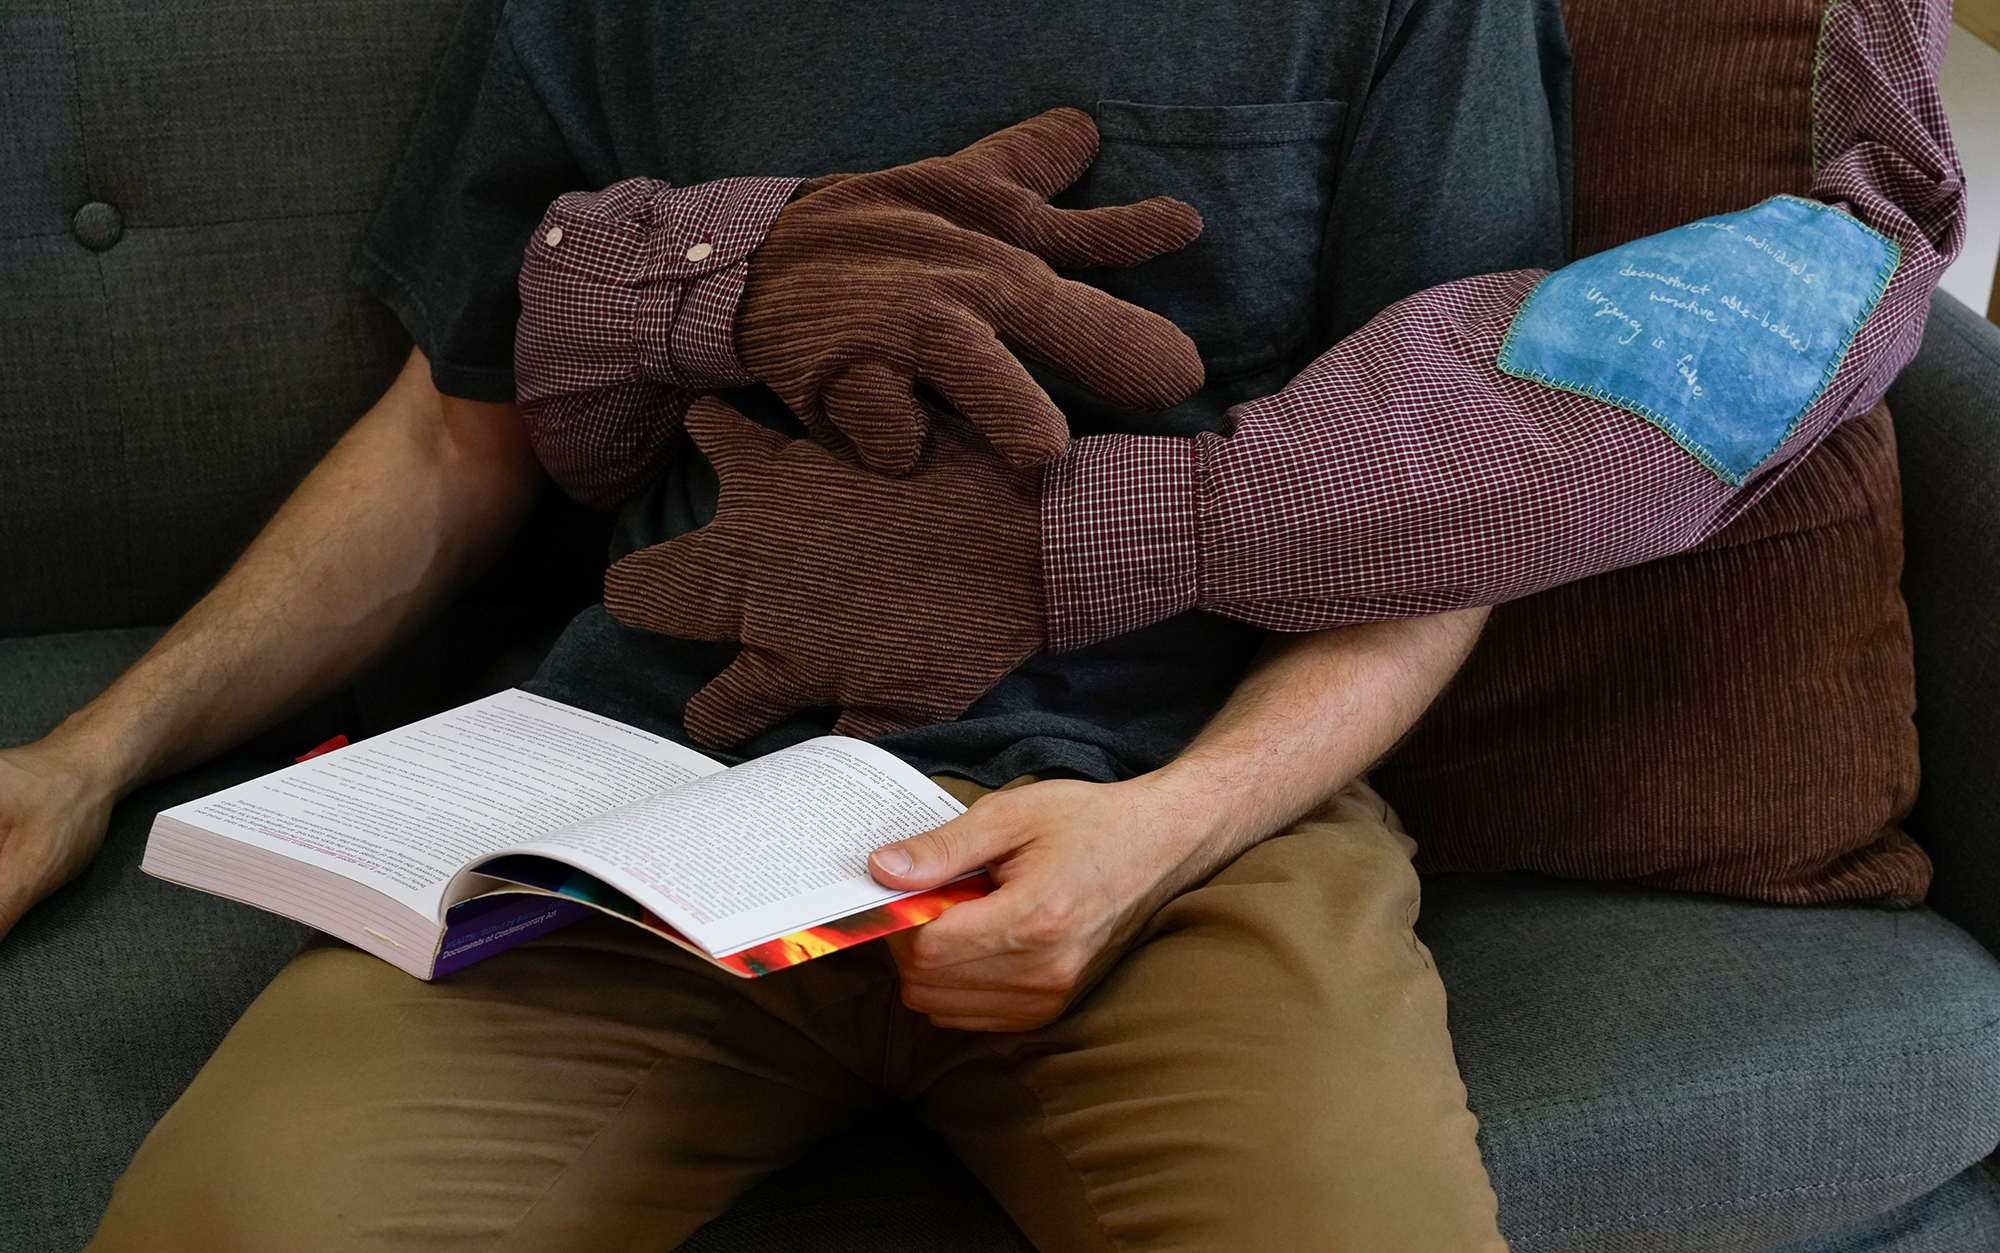 Person sitting reading a book with pillow with sewn arms wrapping around them